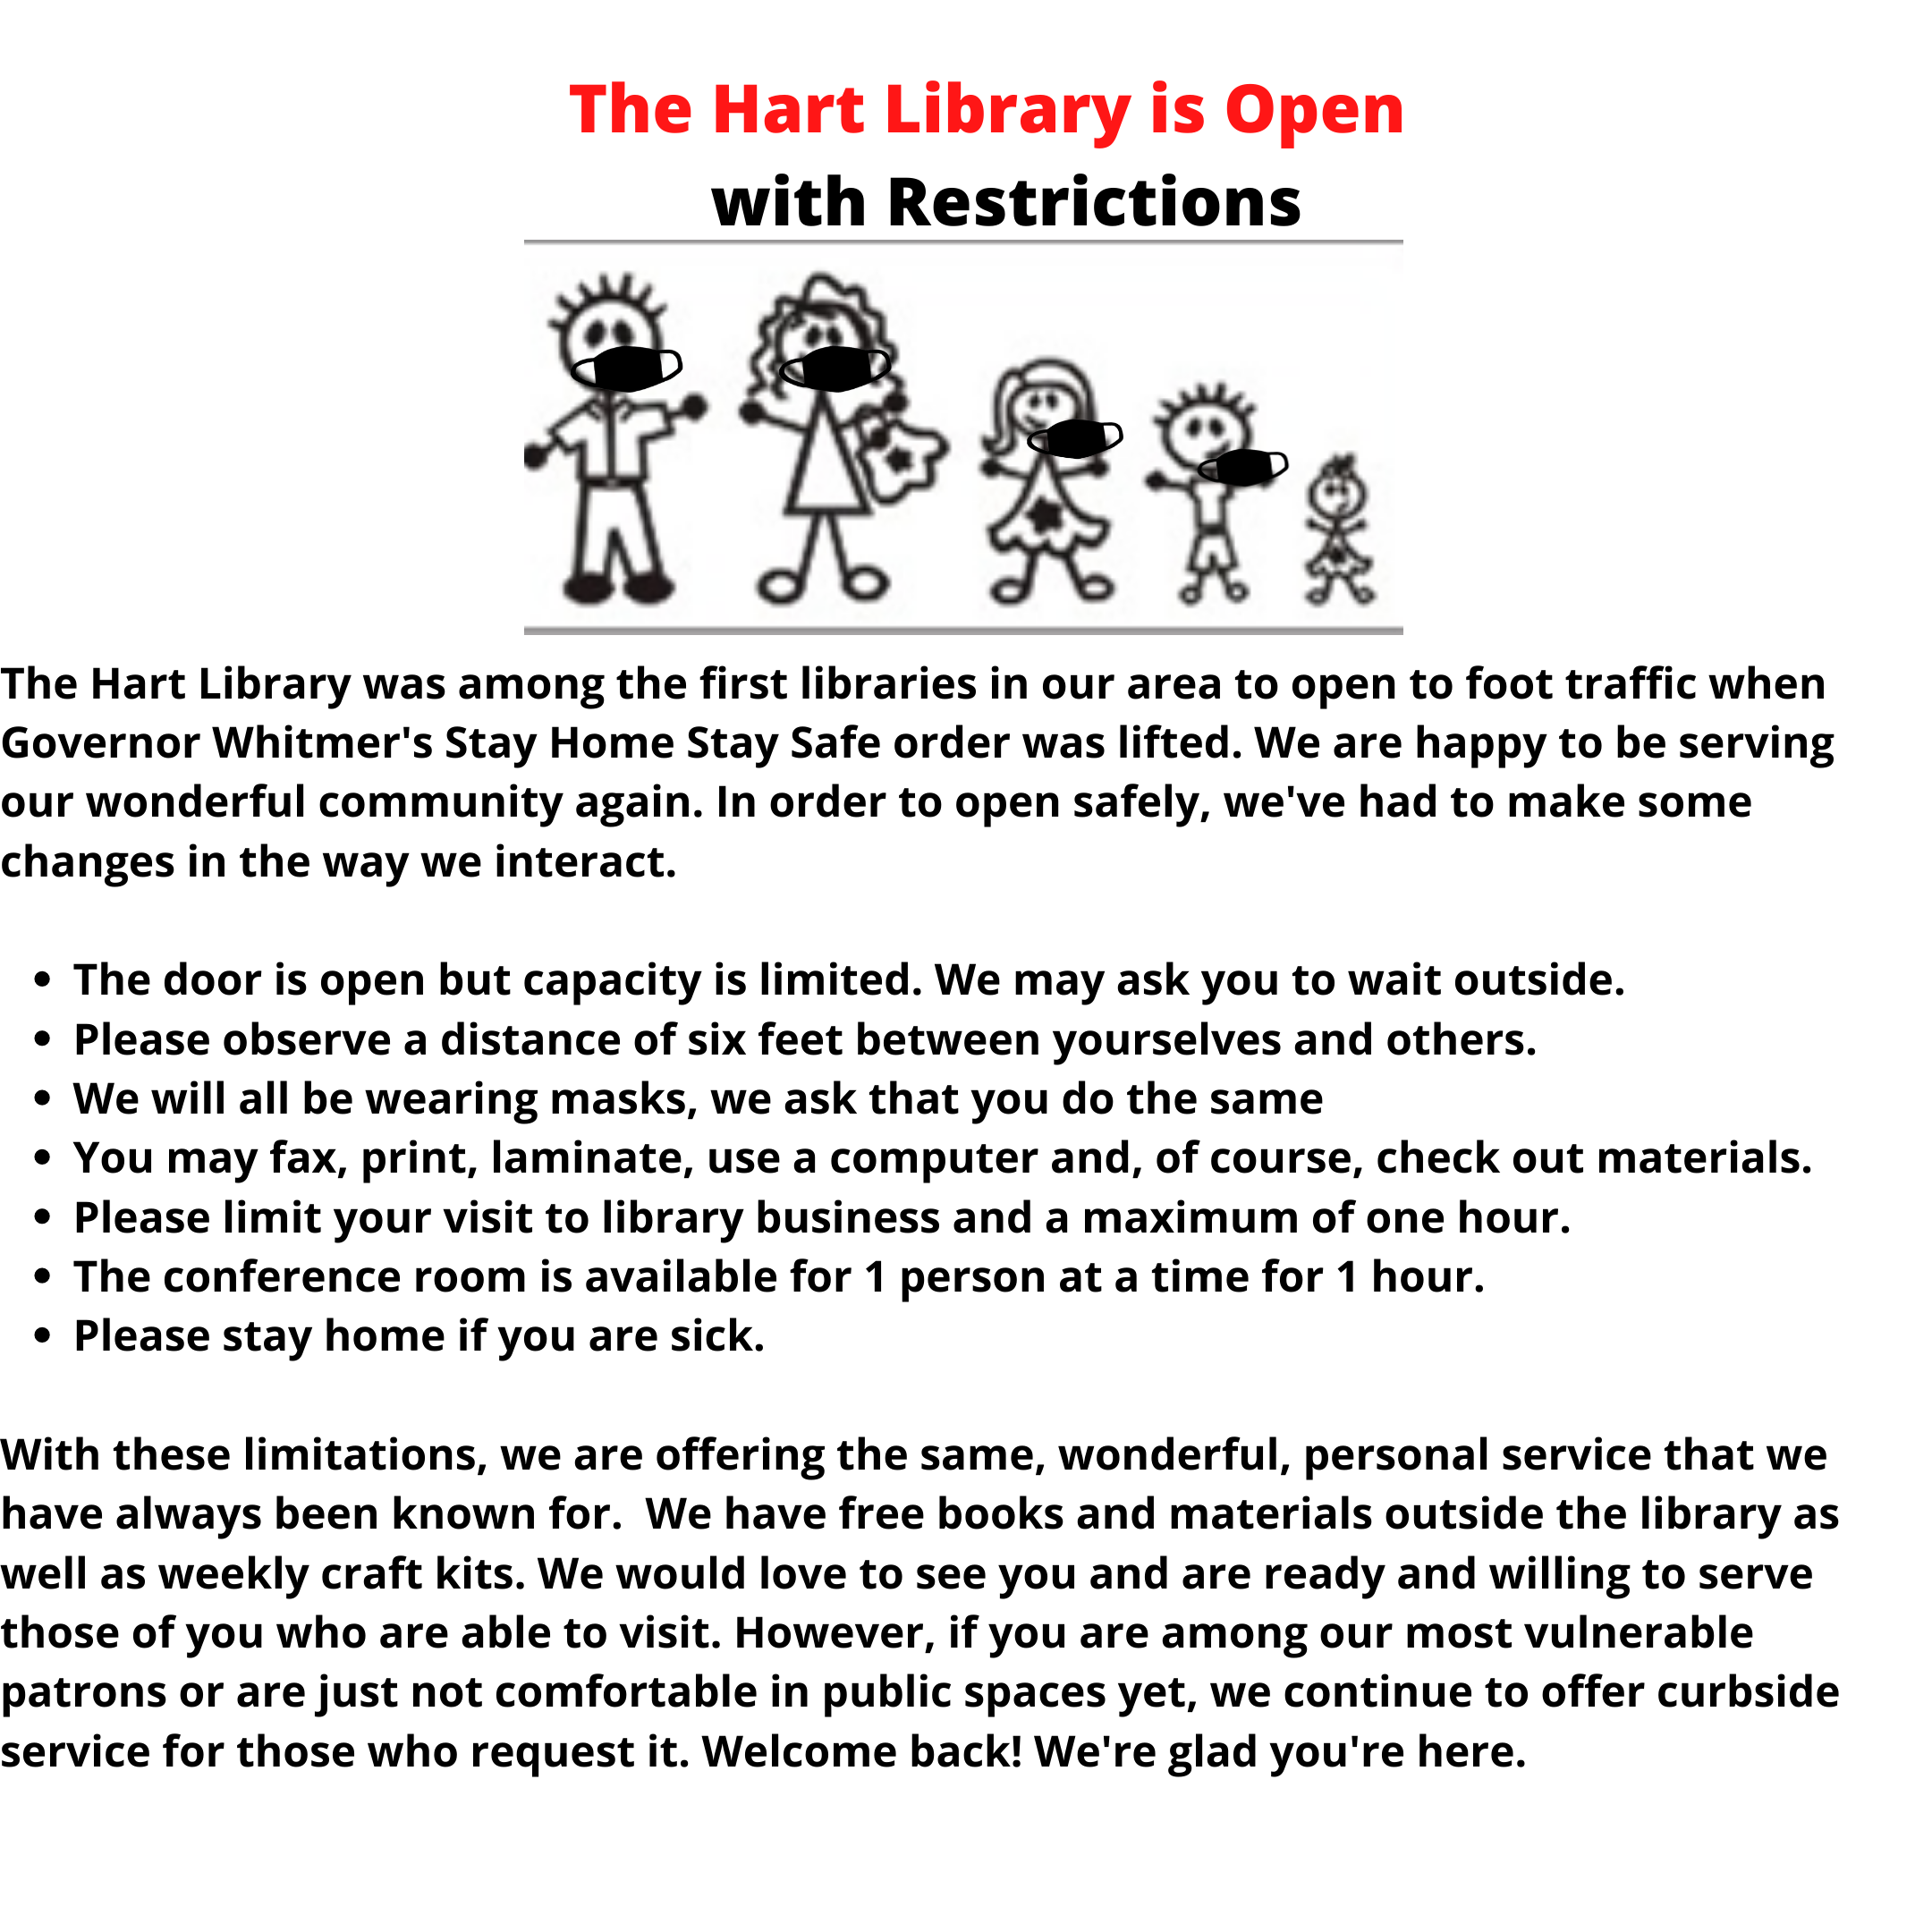 The Hart Library is Open with Restrictions (3).png